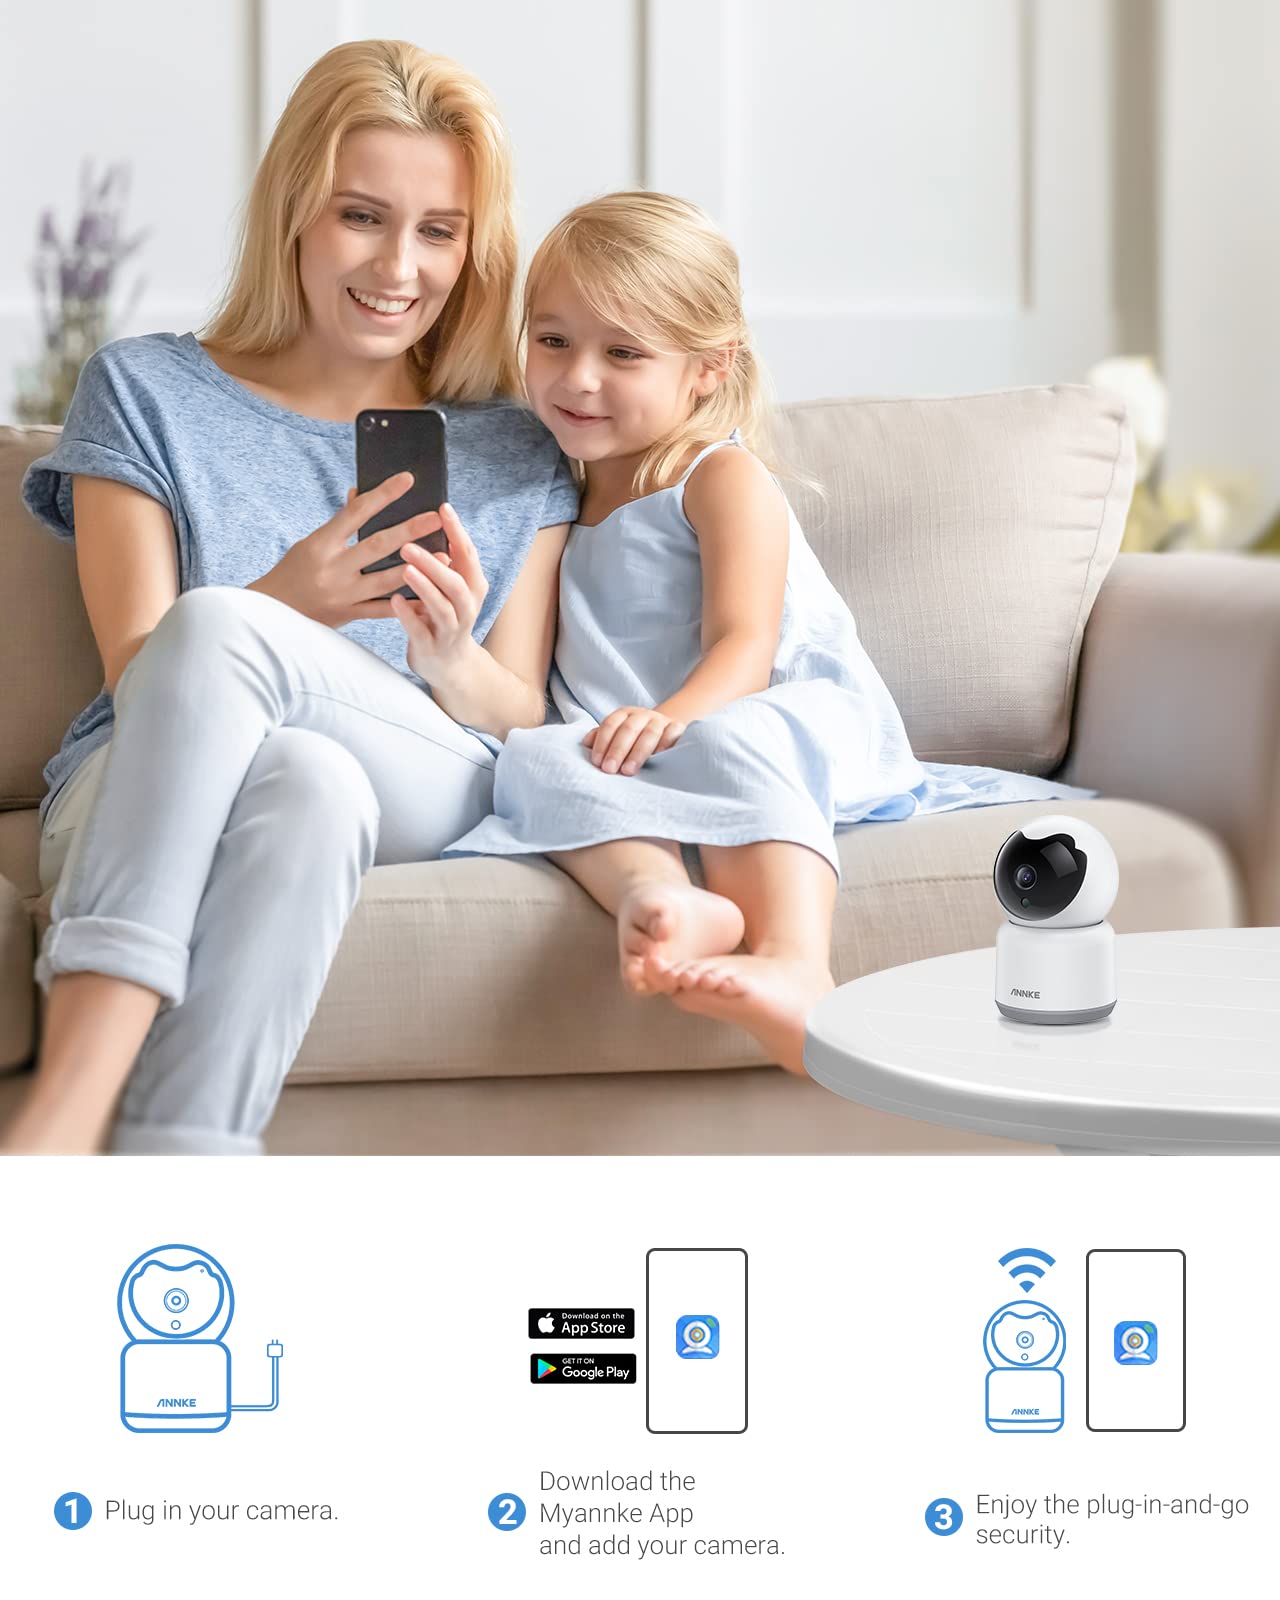 ANNKE Crater 2-2K WiFi Pan Tilt Smart Security Camera, Upgraded 3MP Baby/Pet Monitor, Indoor Camera 360-degree with Two-Way Audio, Human Motion Detection, Cloud & SD Card Storage, Works with Alexa